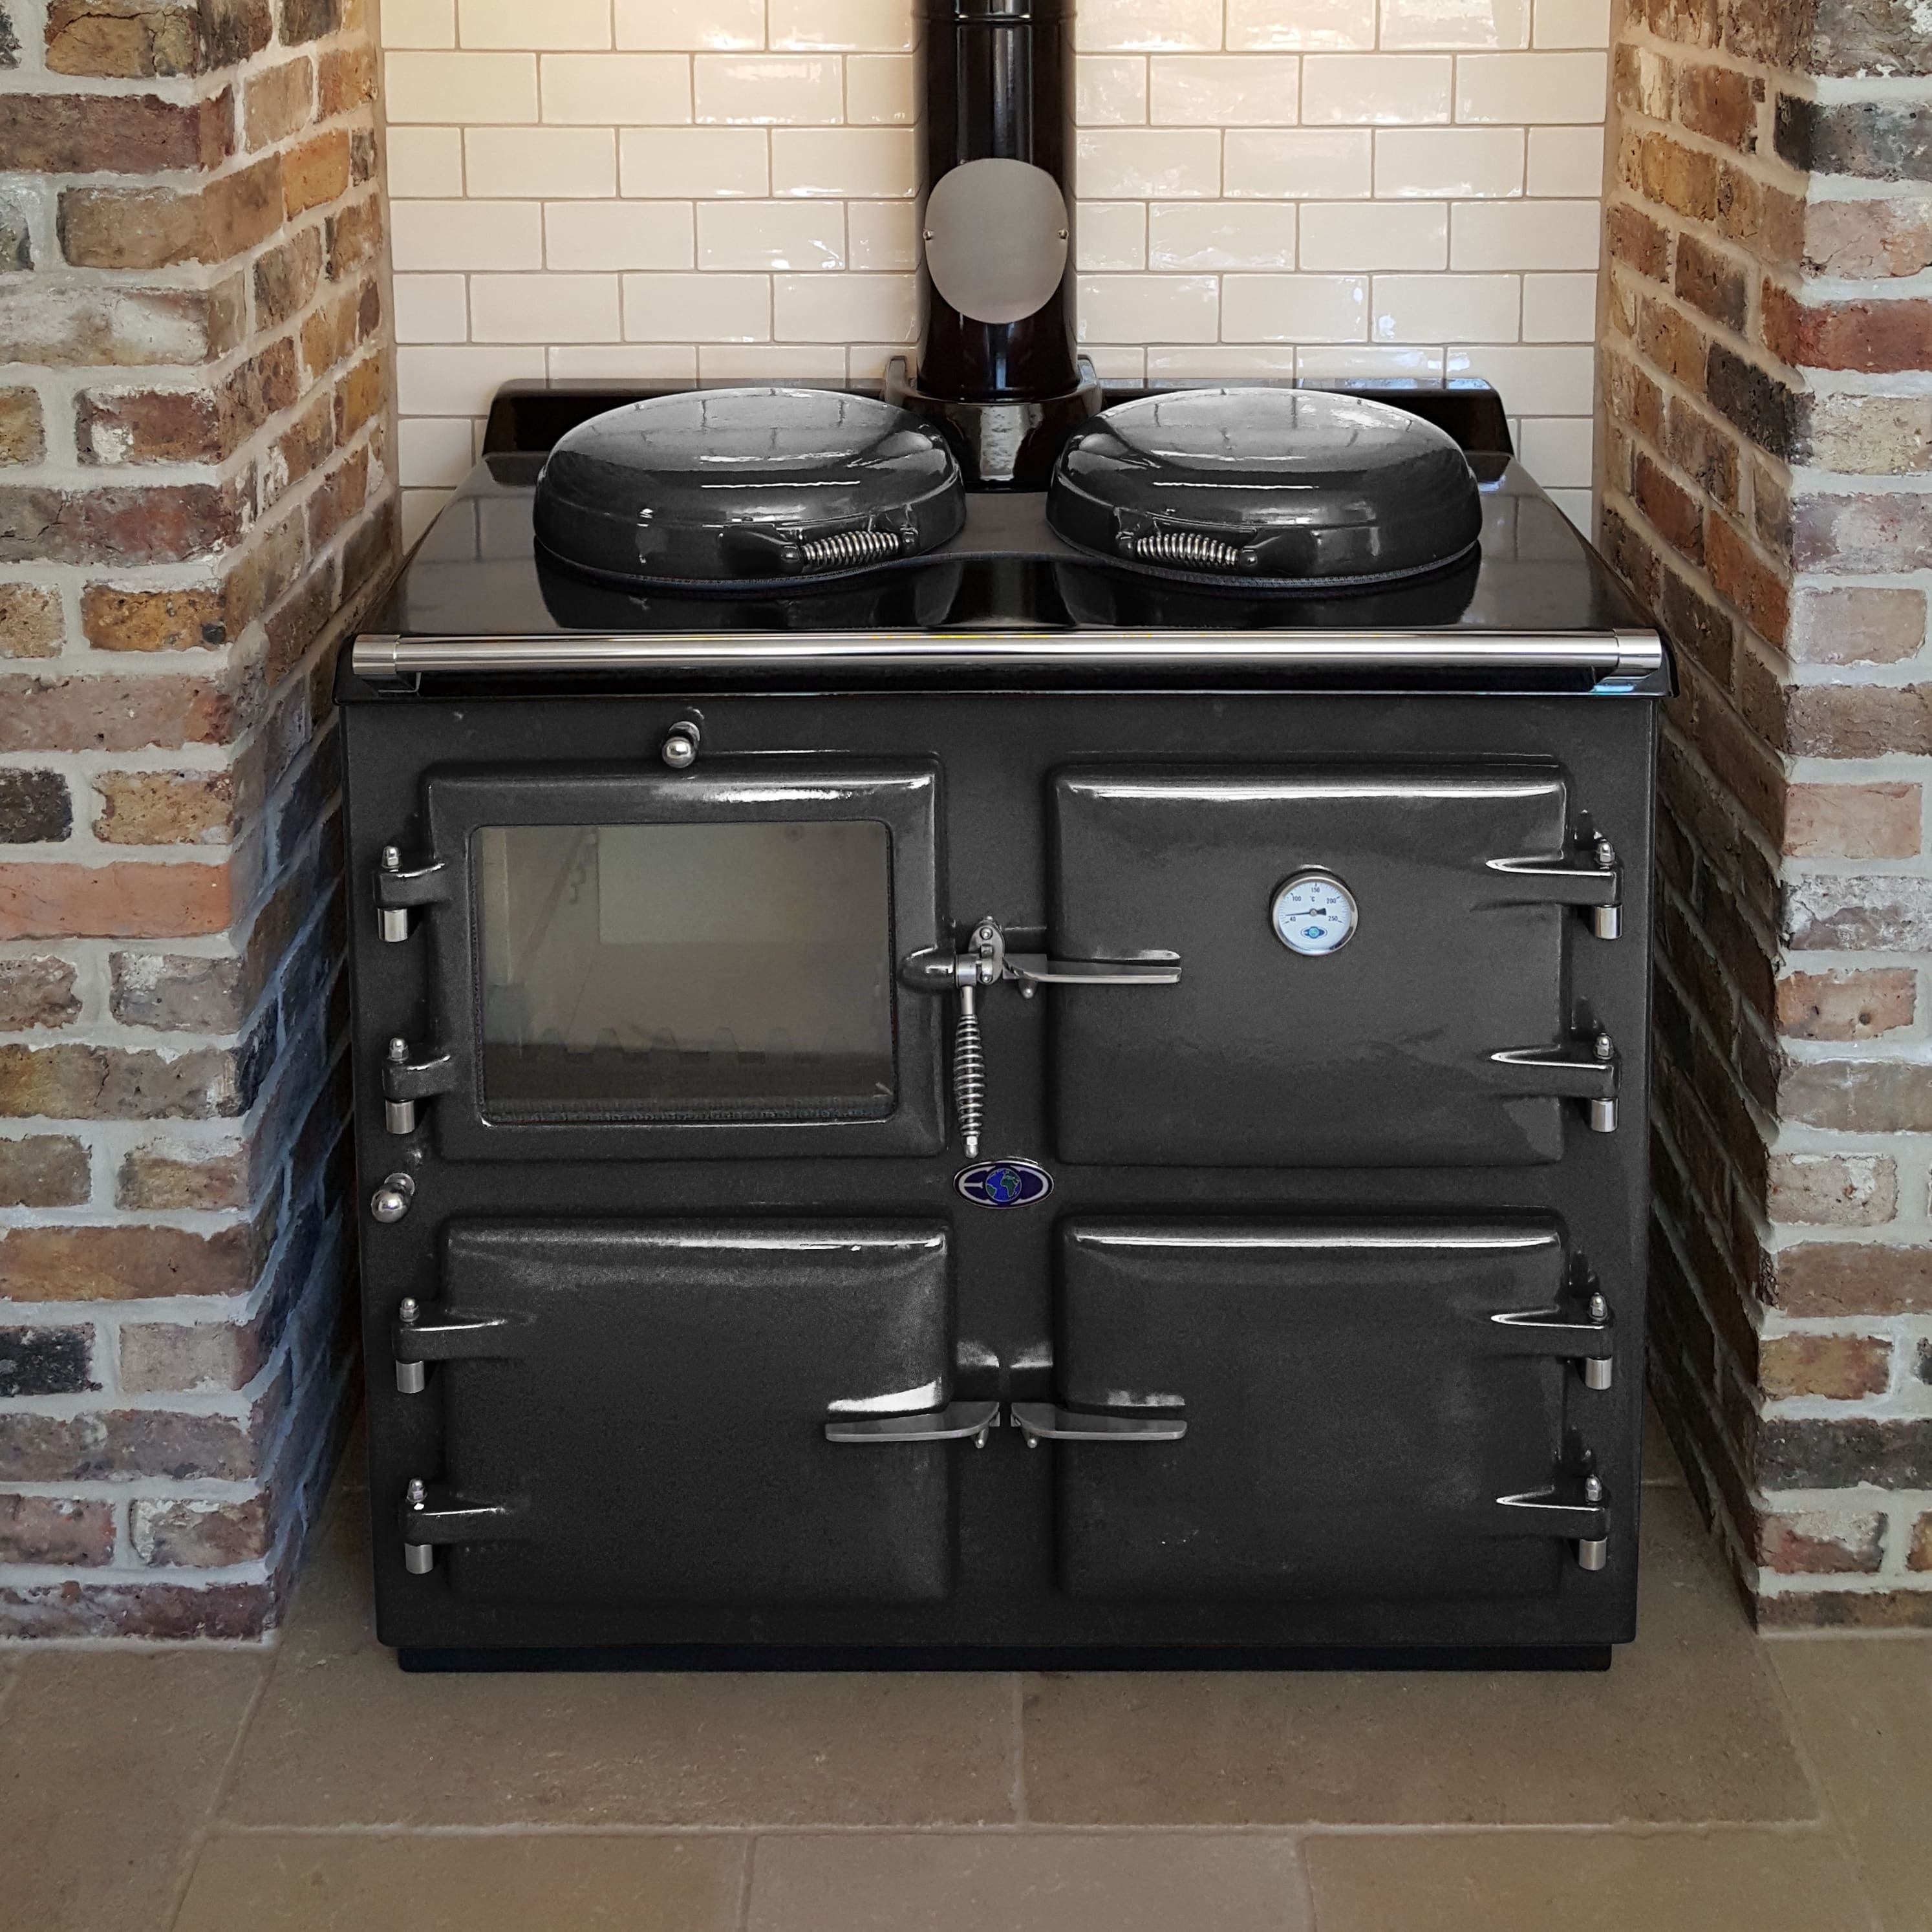 Rayburn Cast Iron Central Heating Range Cookers